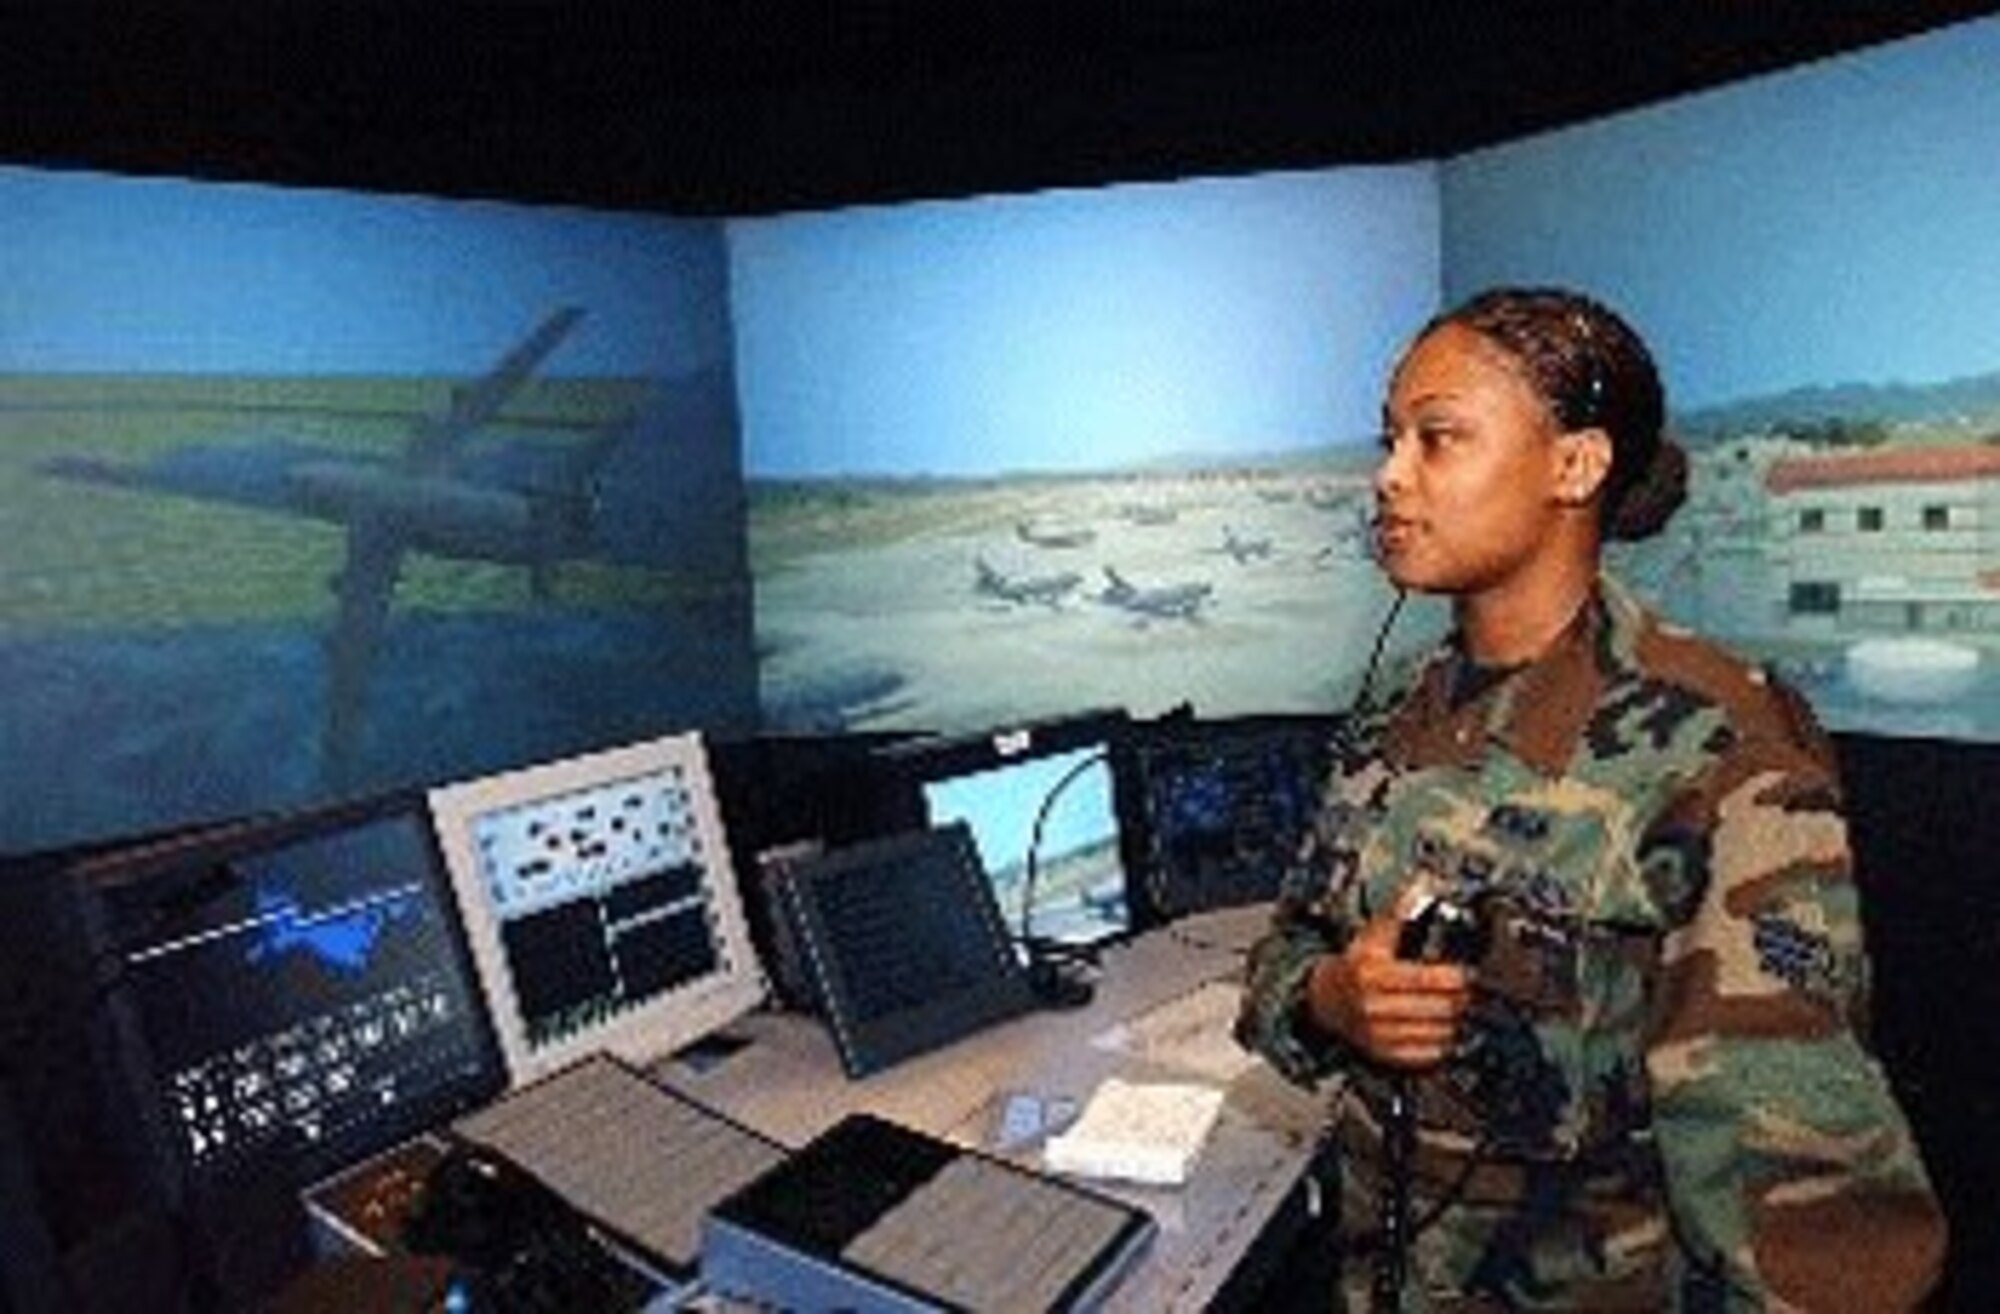 Senior Airman Tiequanda Hayes, 60th Operations Support Squadron, performs training on the air traffic control simulator. The simulator replicates the tower environment by providing a visual representation of the Travis airfield, which allows for in-depth, realistic training for air traffic controllers.